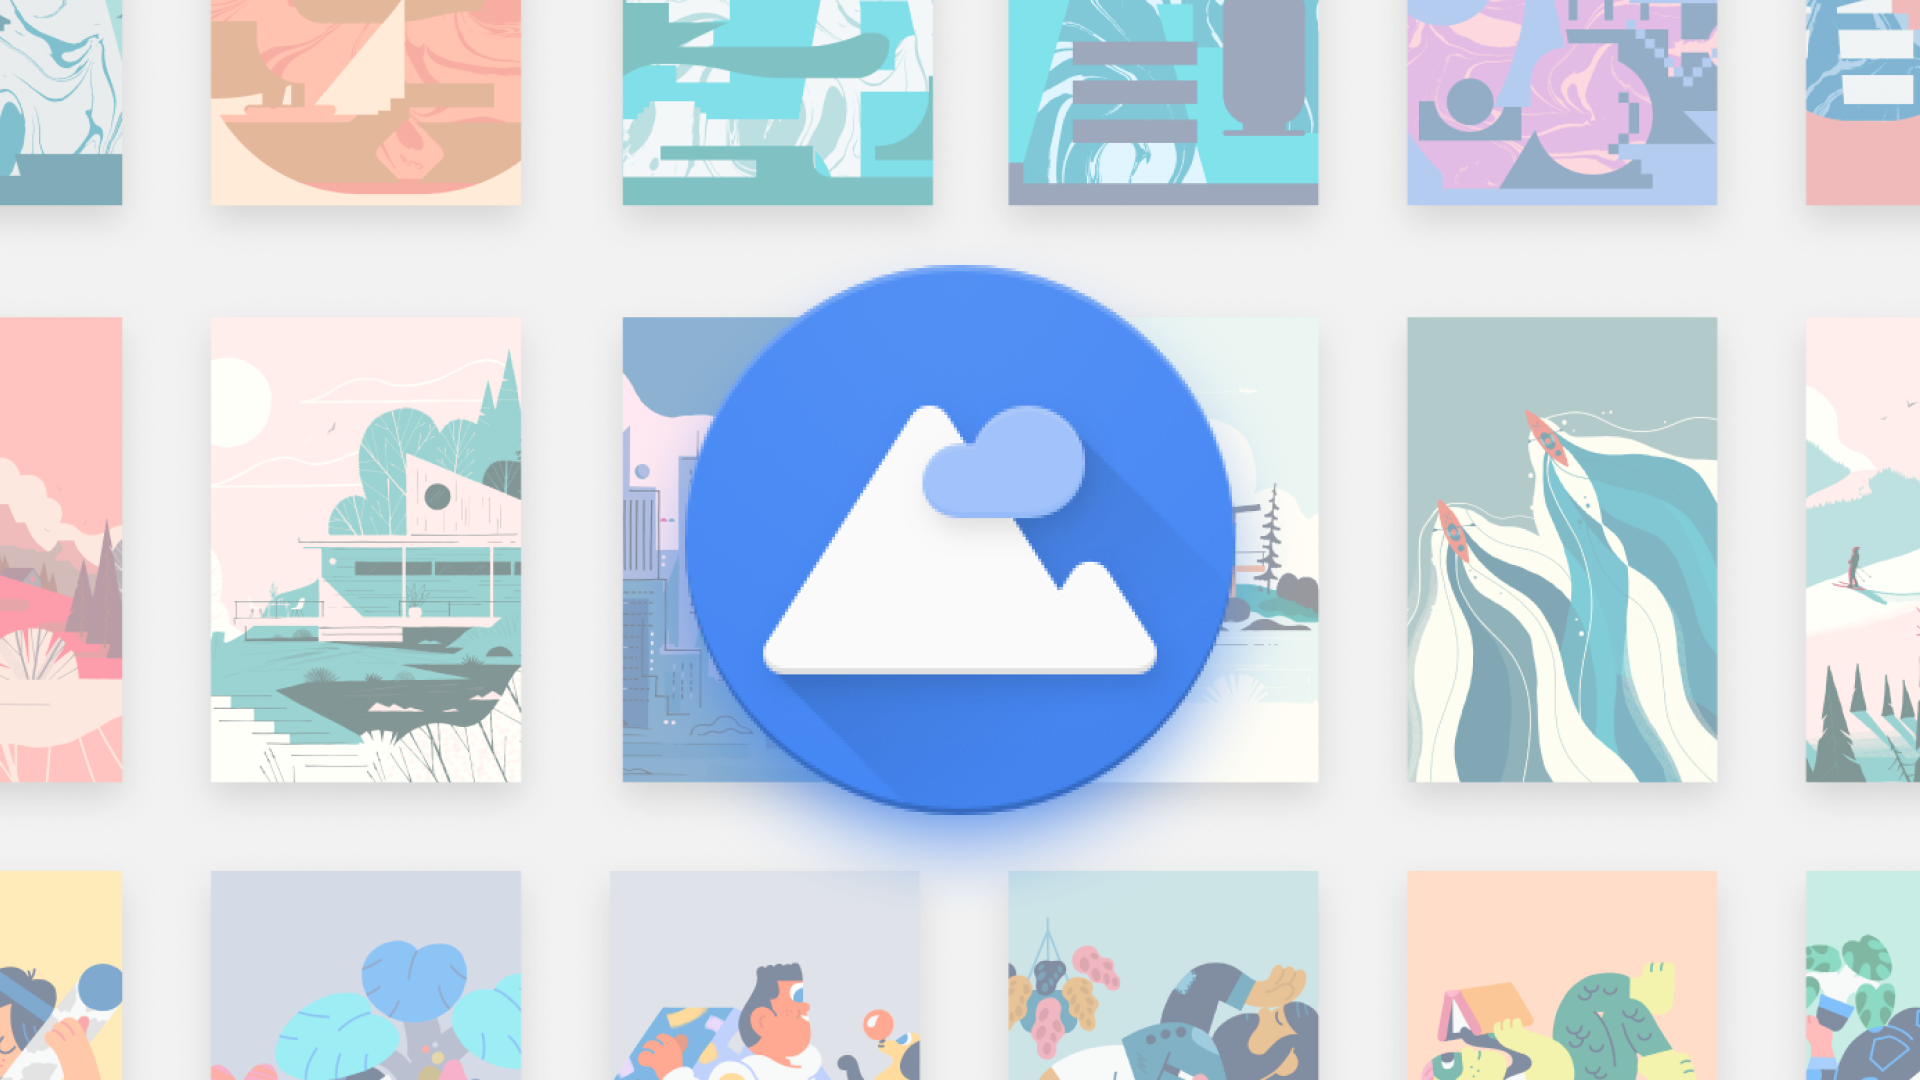 Google has released a beautiful new set of wallpapers on Chrome OS, which  you can download here